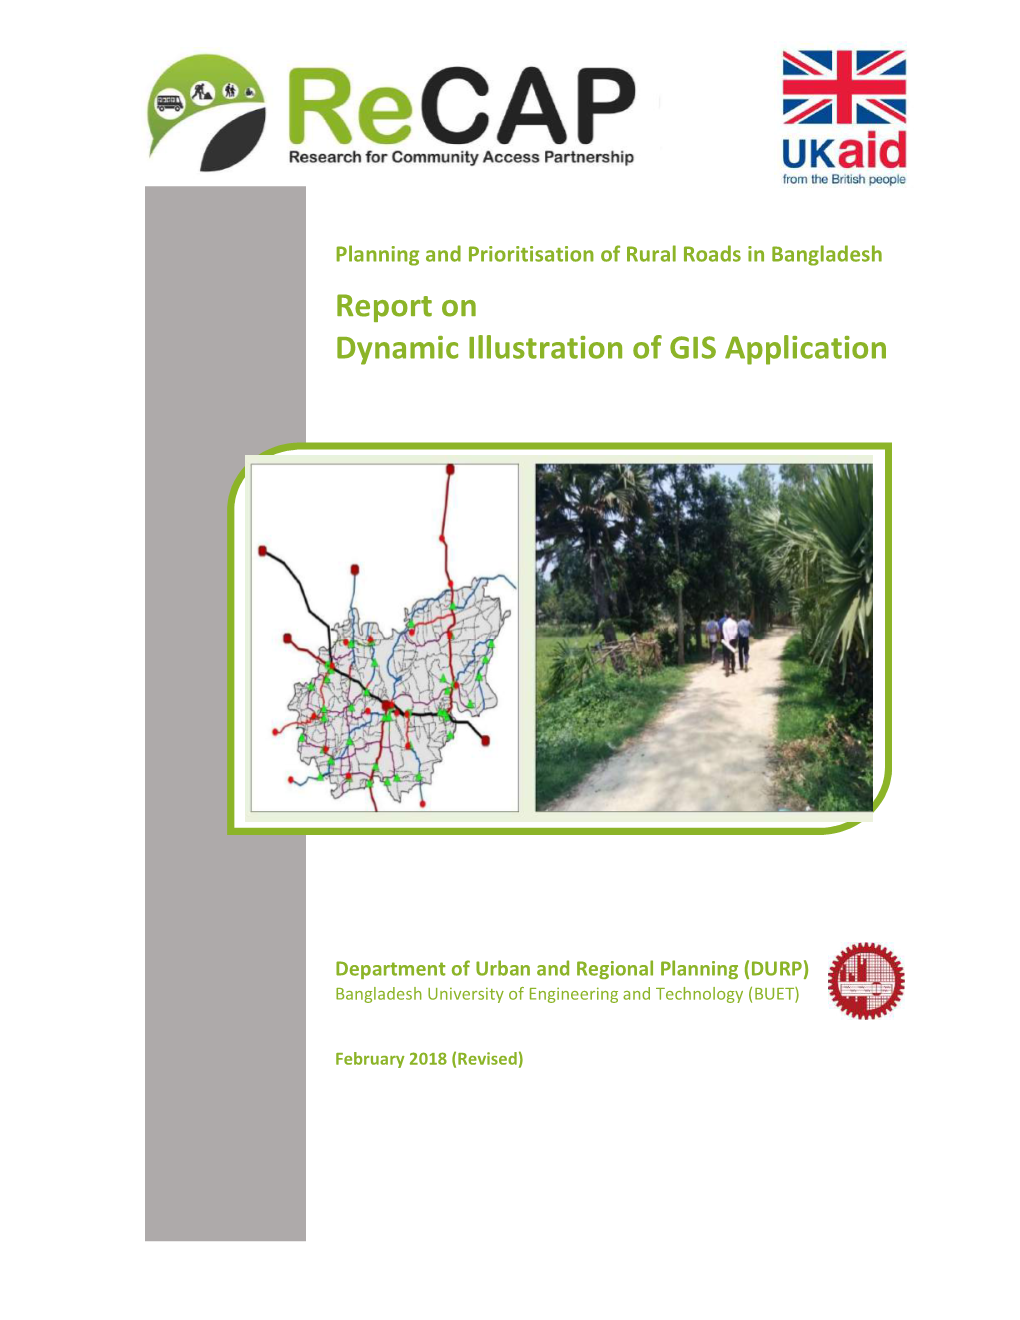 Report on Dynamic Illustration of GIS Application